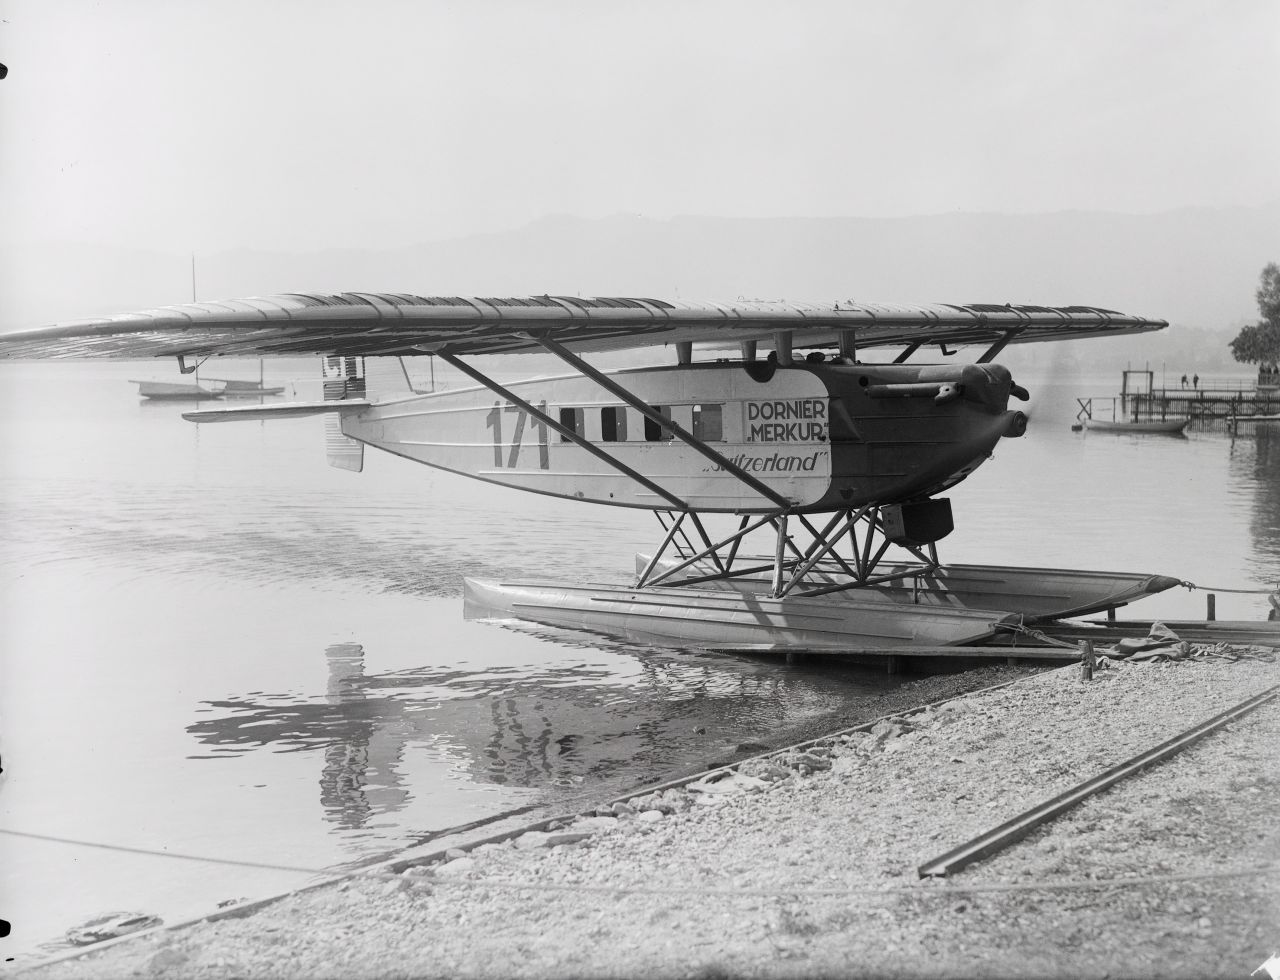 <strong>African skies: </strong>In 1926-7, Mittelholzer famously conducted the first north-south flight across Africa in his plane, Dornier Merkur, CH-171 "Switzerland," pictured here.